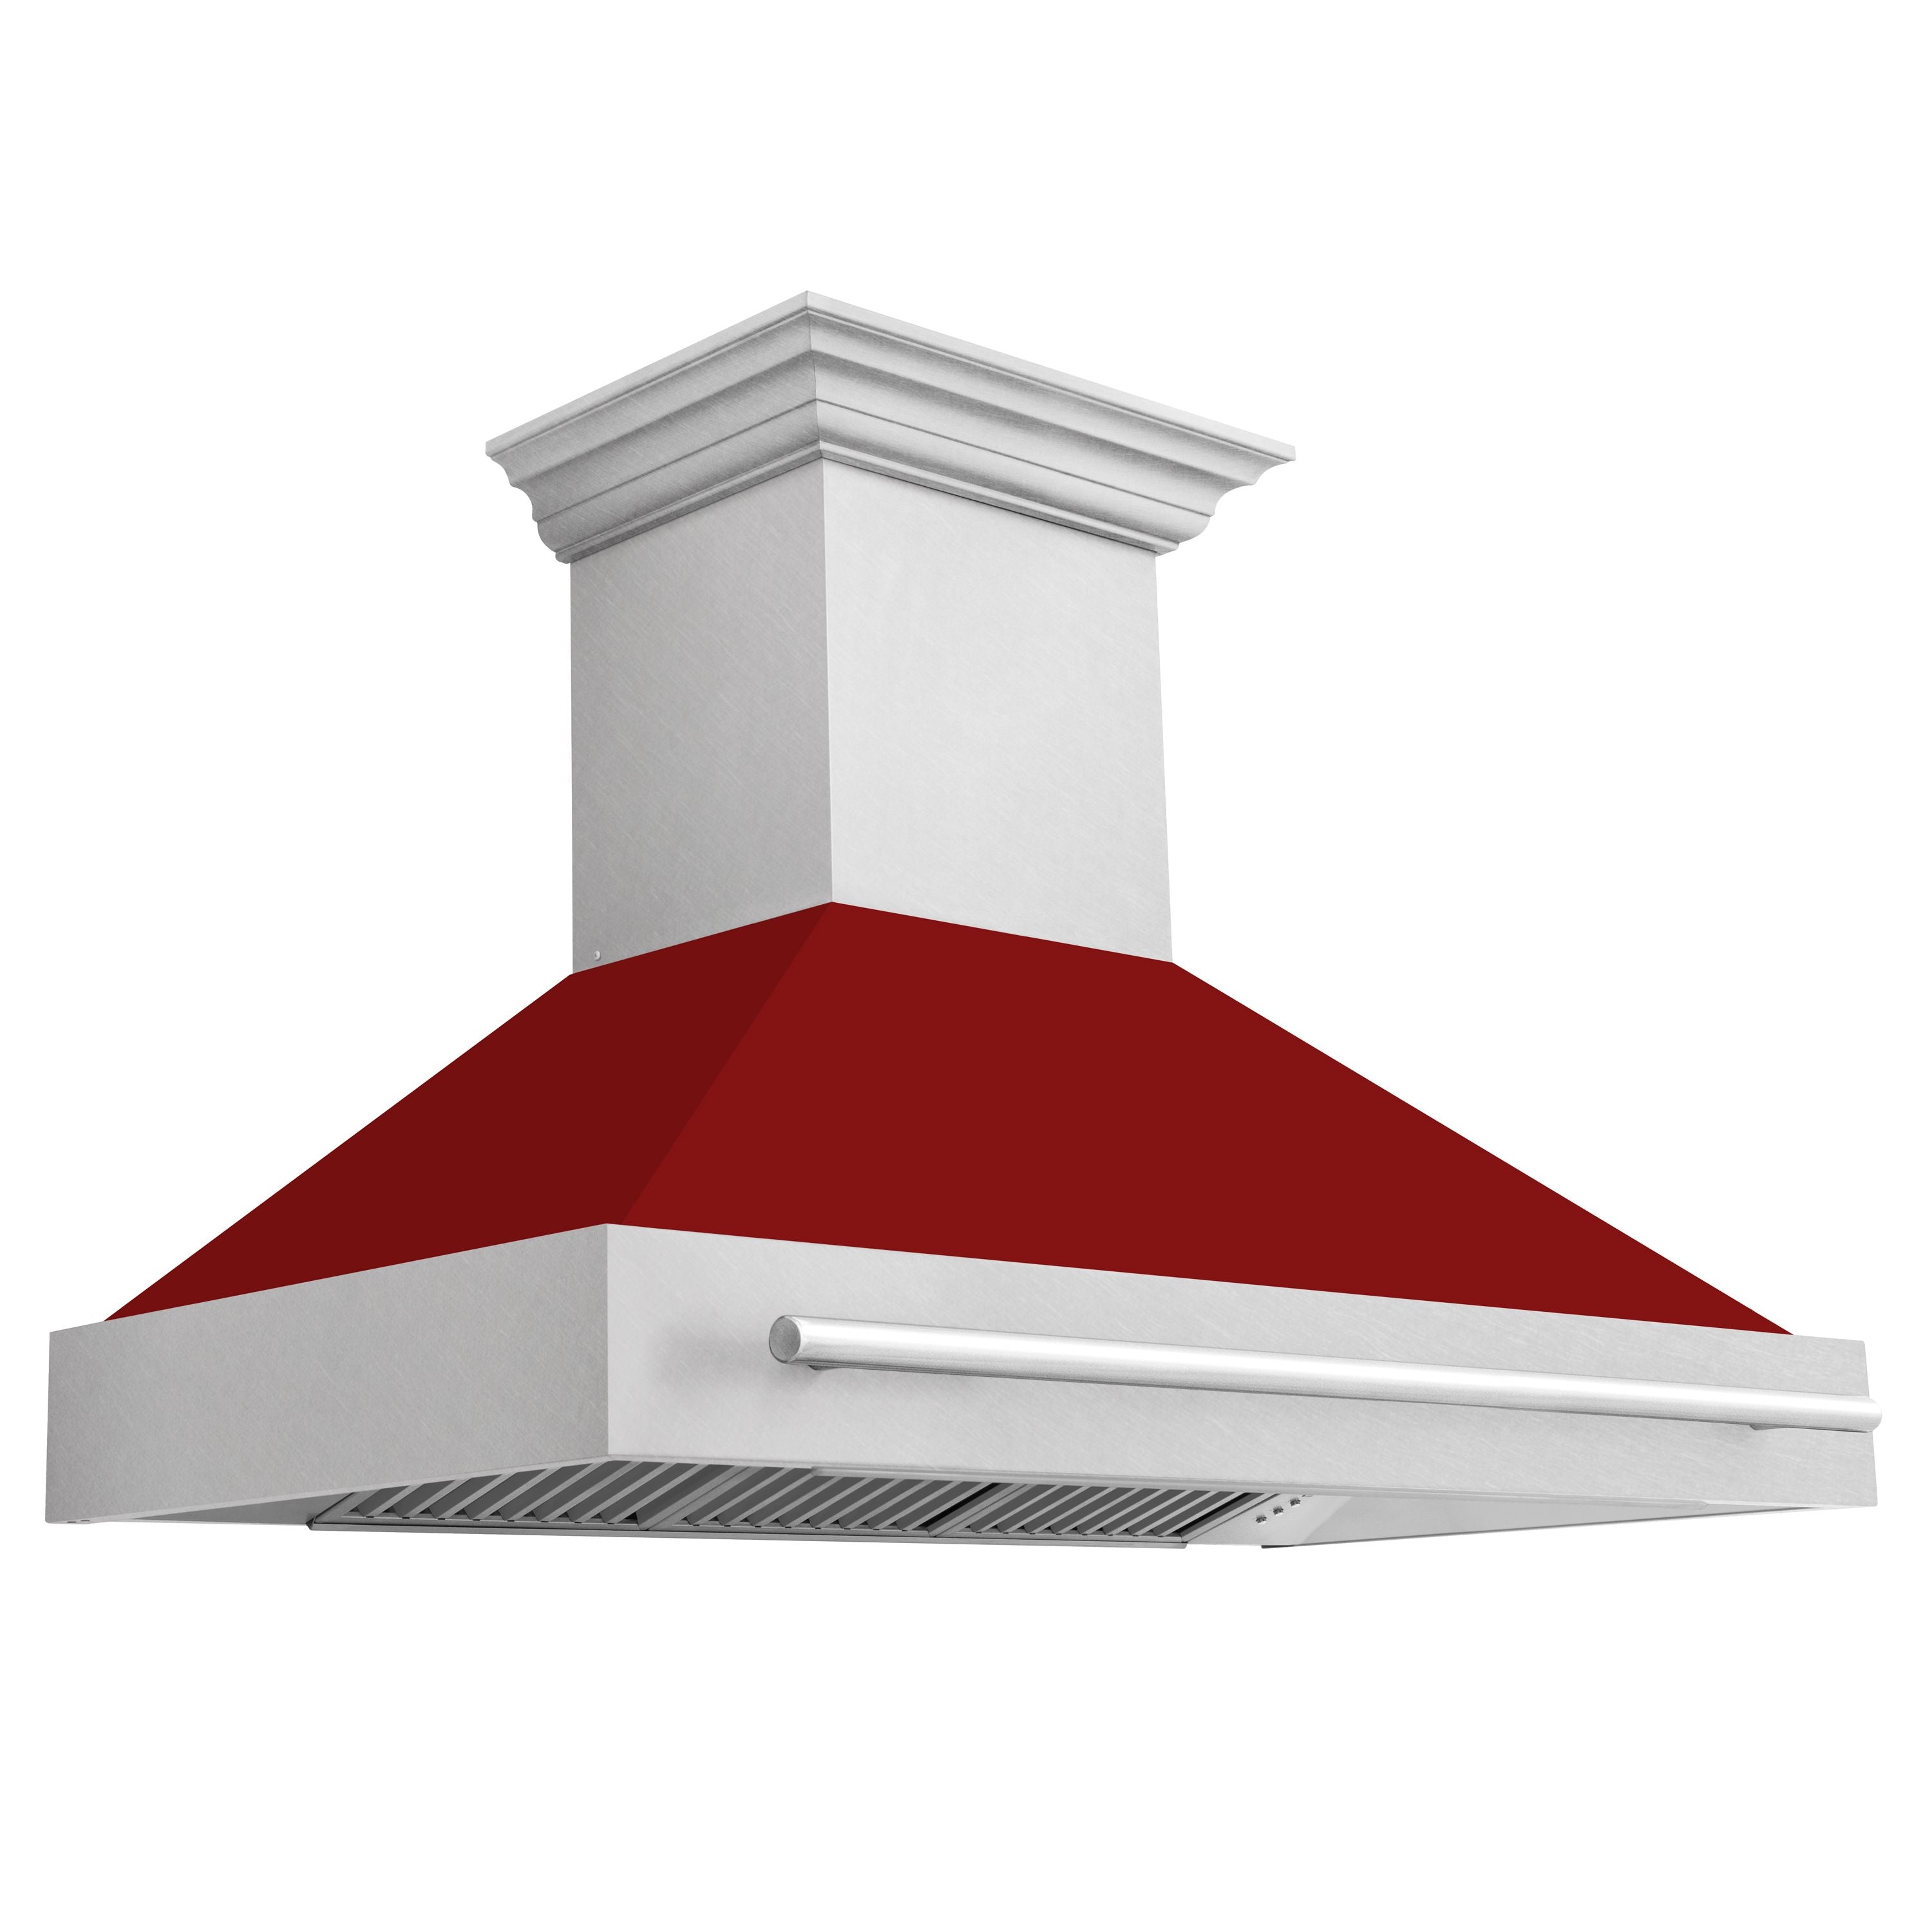 ZLINE 48 In. DuraSnow® Stainless Steel Range Hood with Red Gloss Shell, 8654SNX-RG48